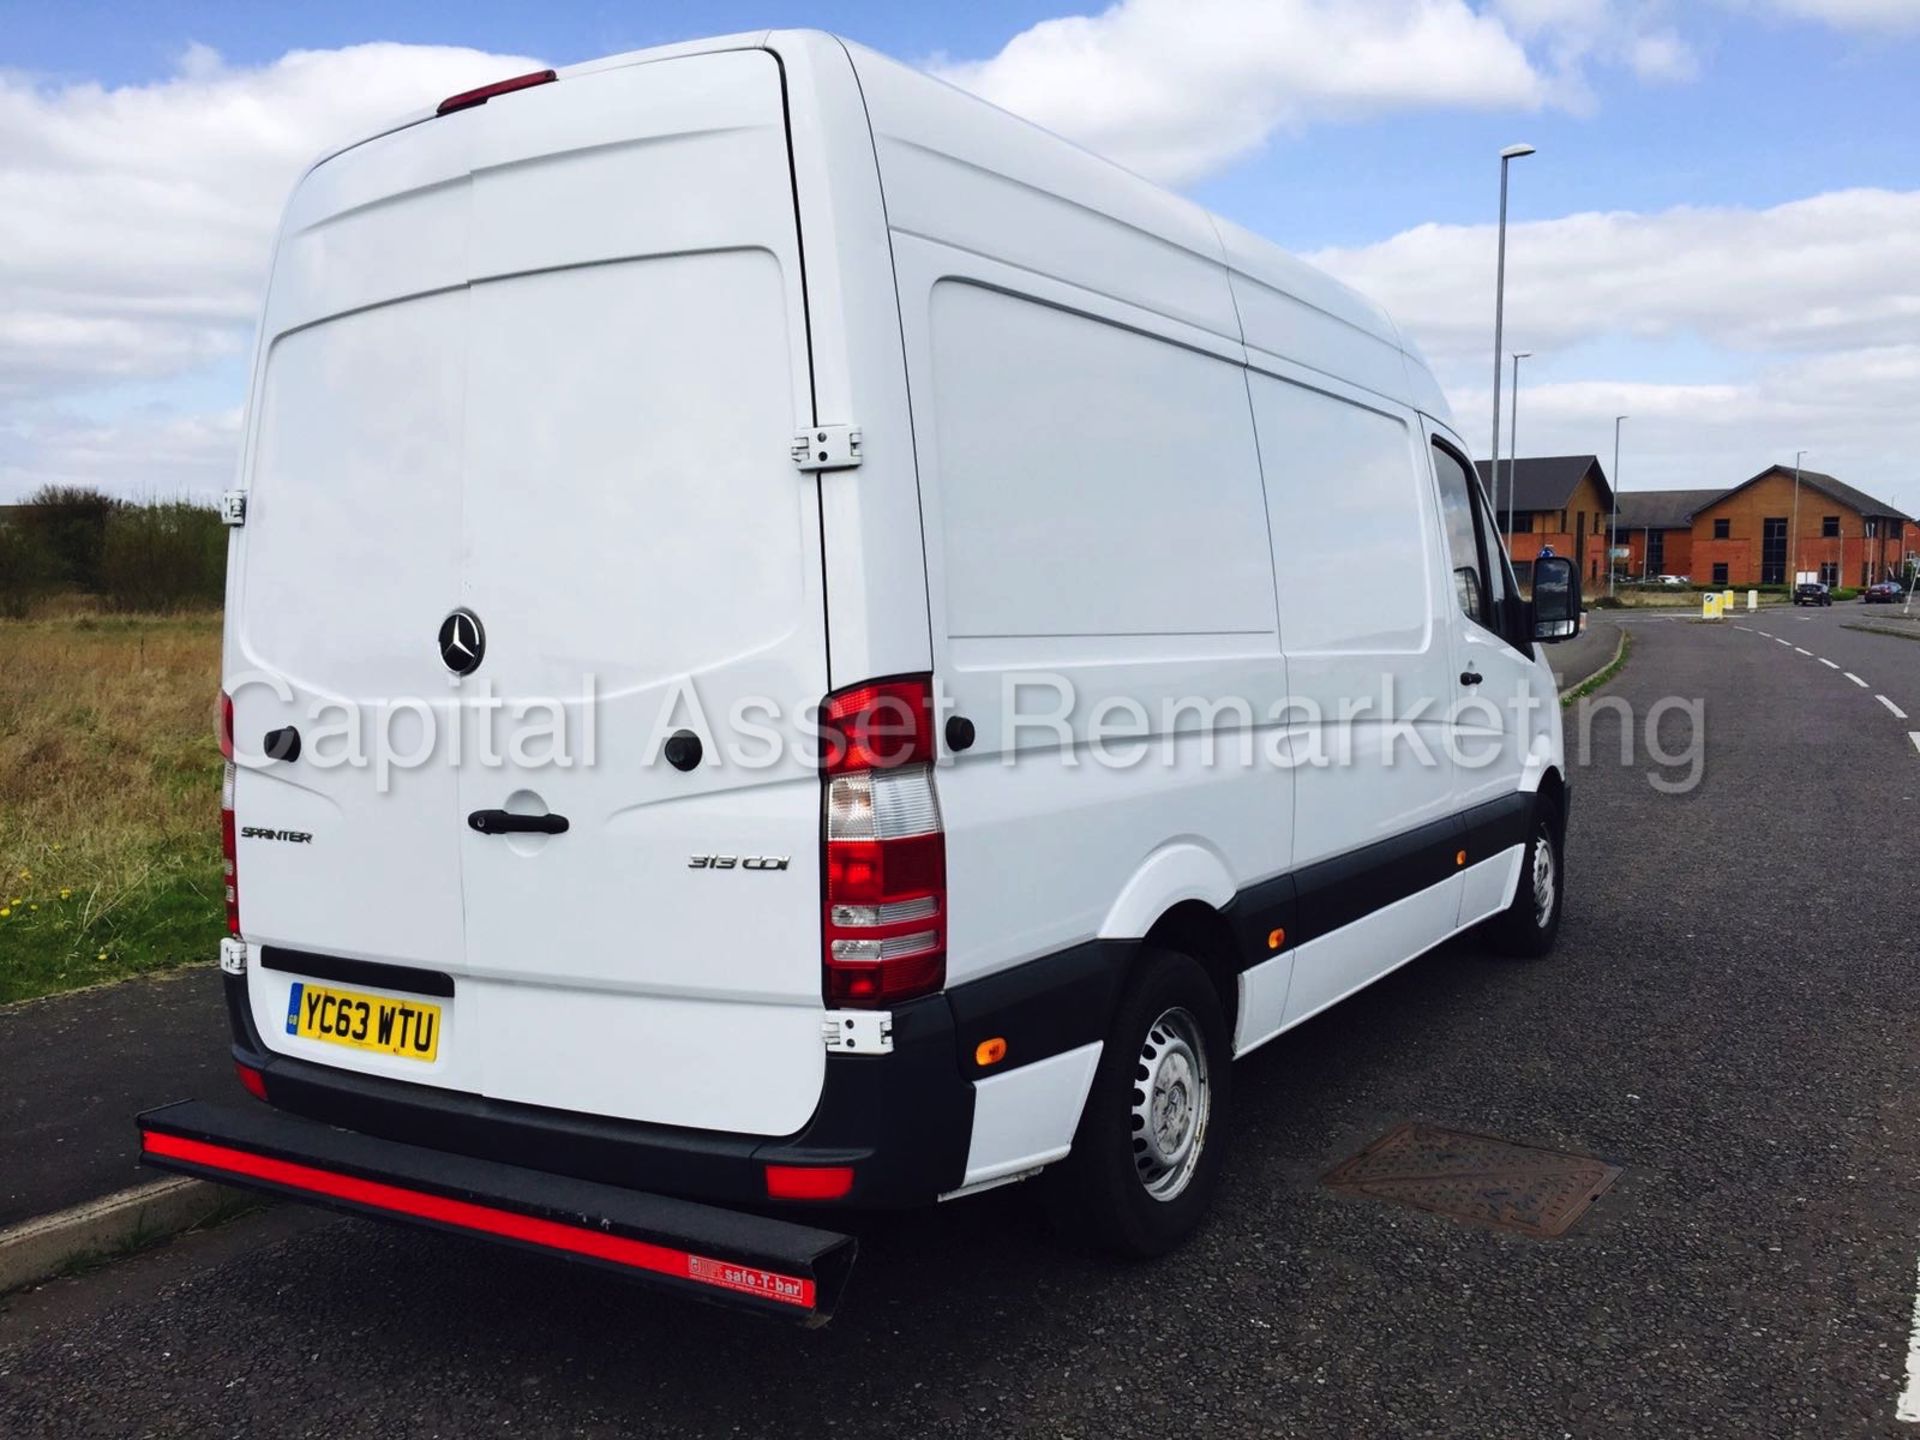 MERCEDES SPRINTER 313CDI "130BHP - 6 SPEED" FACELIFT MODEL / NEW SHAPE (2014 YEAR) 1 OWNER - Image 7 of 11